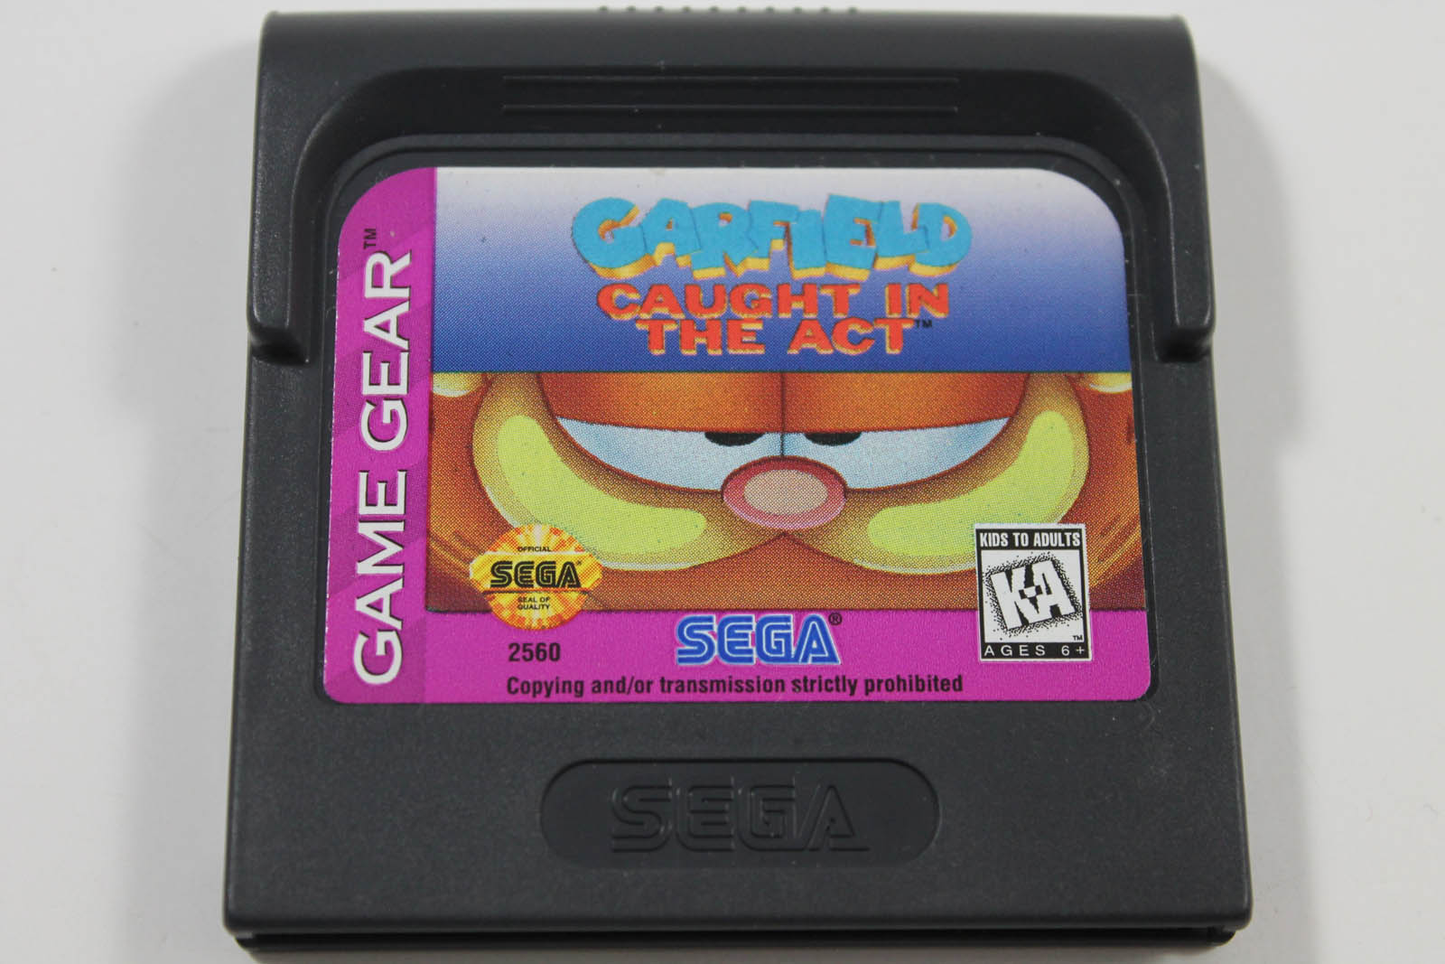 Garfield Caught in the Act - Game Gear